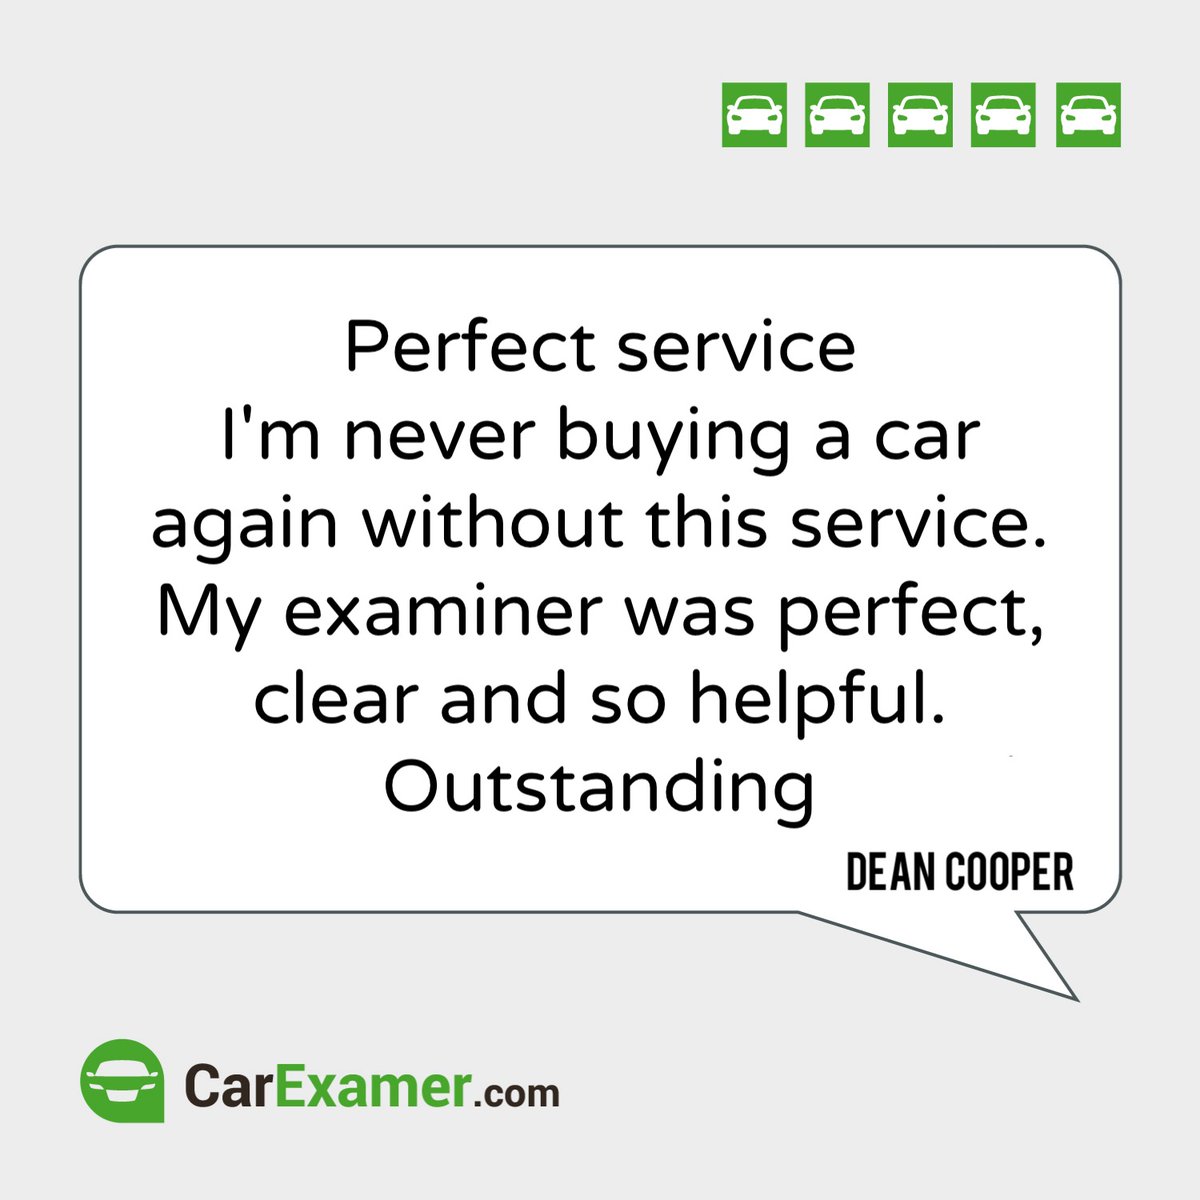 We work for you 🚘 👇
CarExamer.com

#cars #carbuy #carbuyingmadeeasy #carseller #carselling #car #automotive #carsell